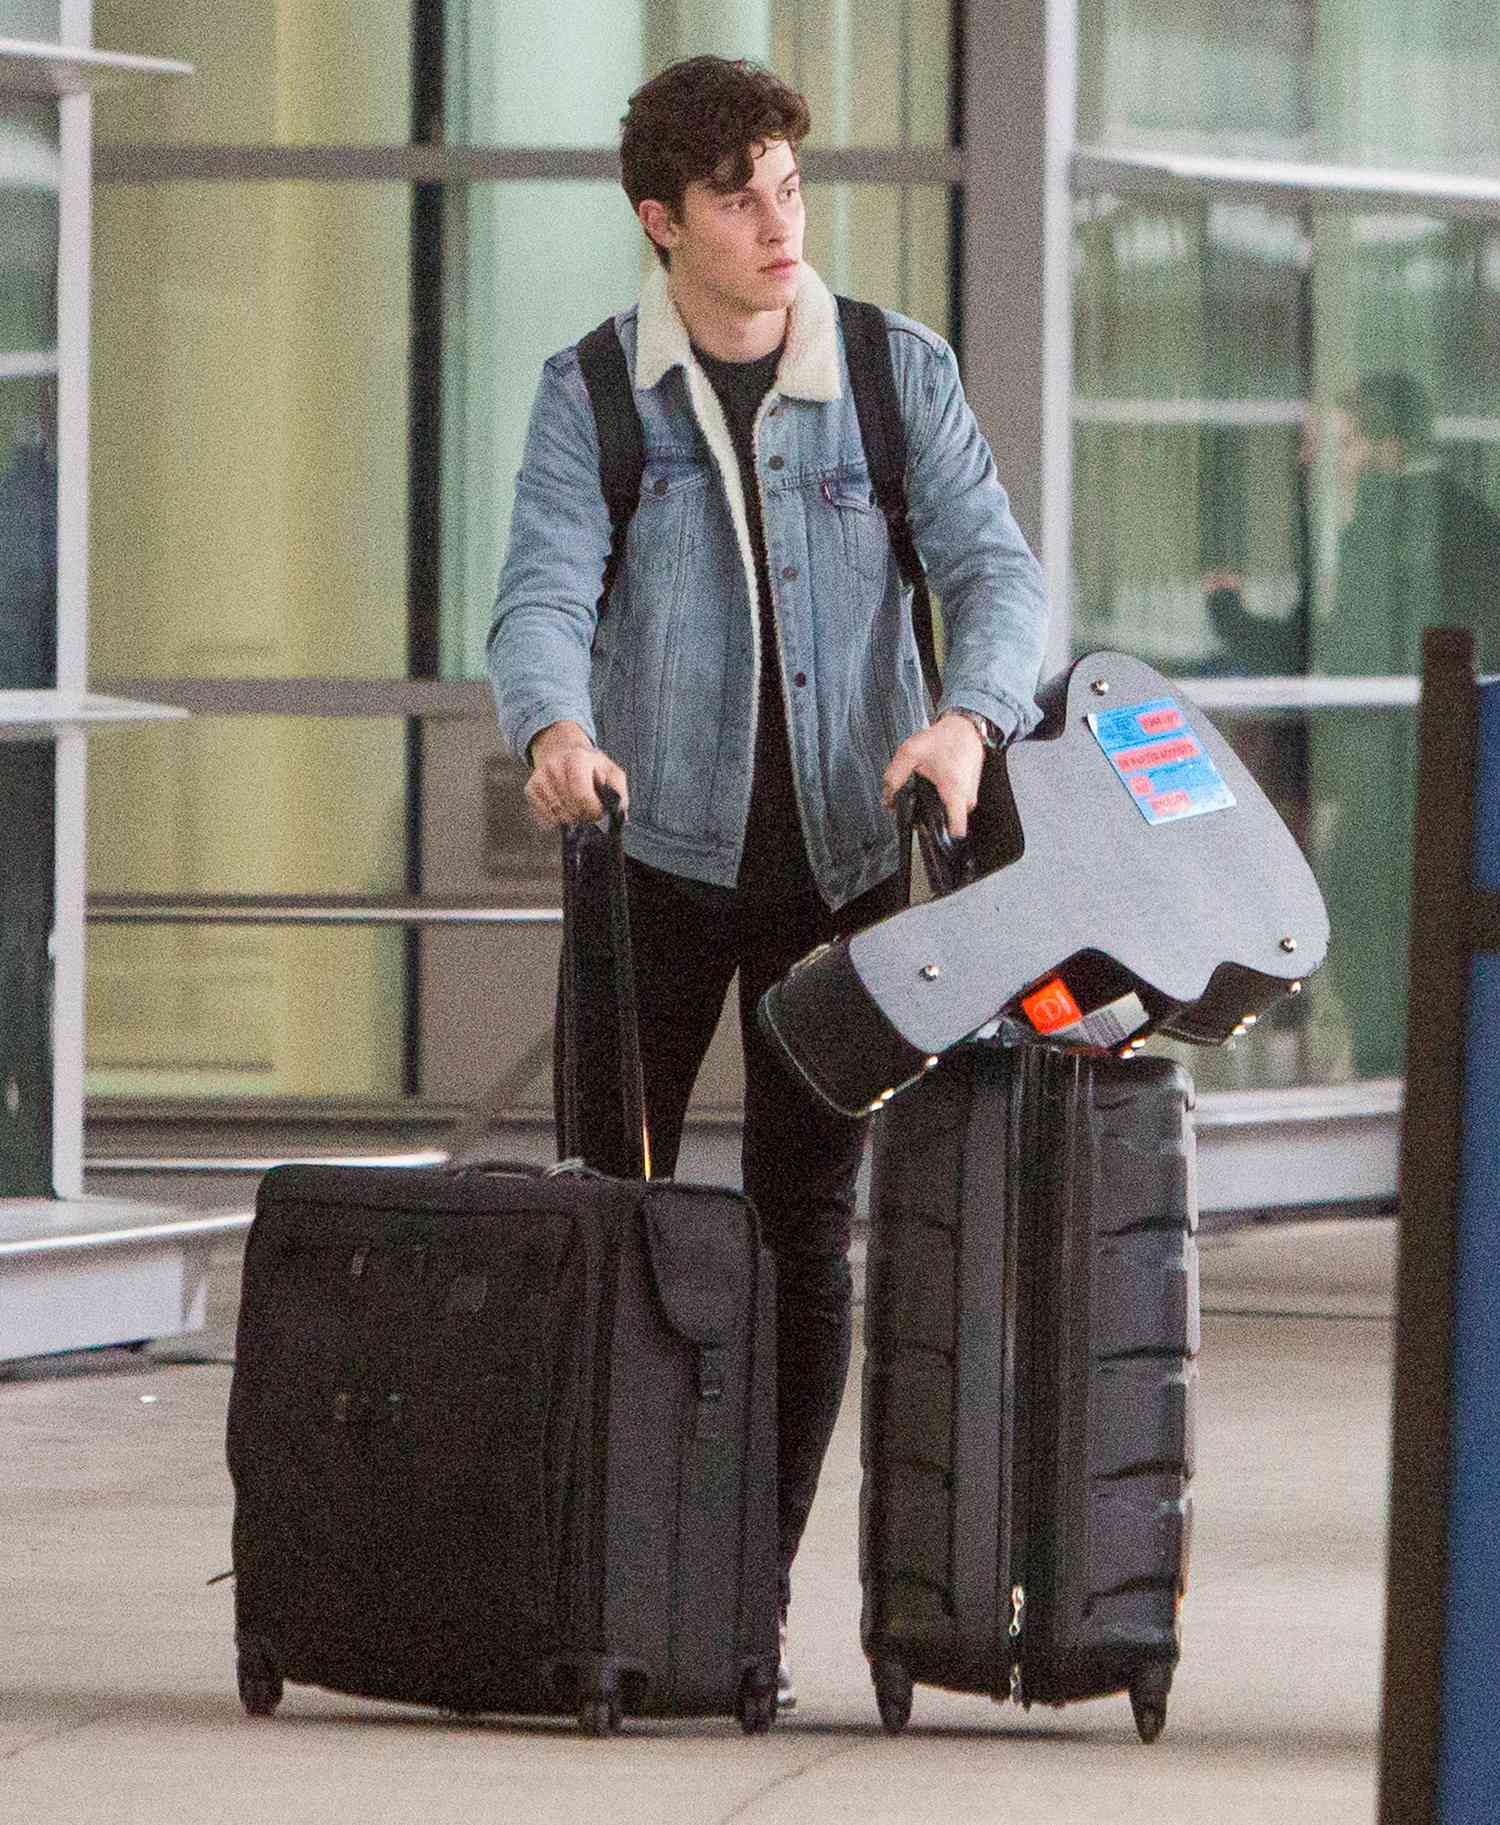 EXCLUSIVE: Shawn Mendes is Spotted Leaving Toronto